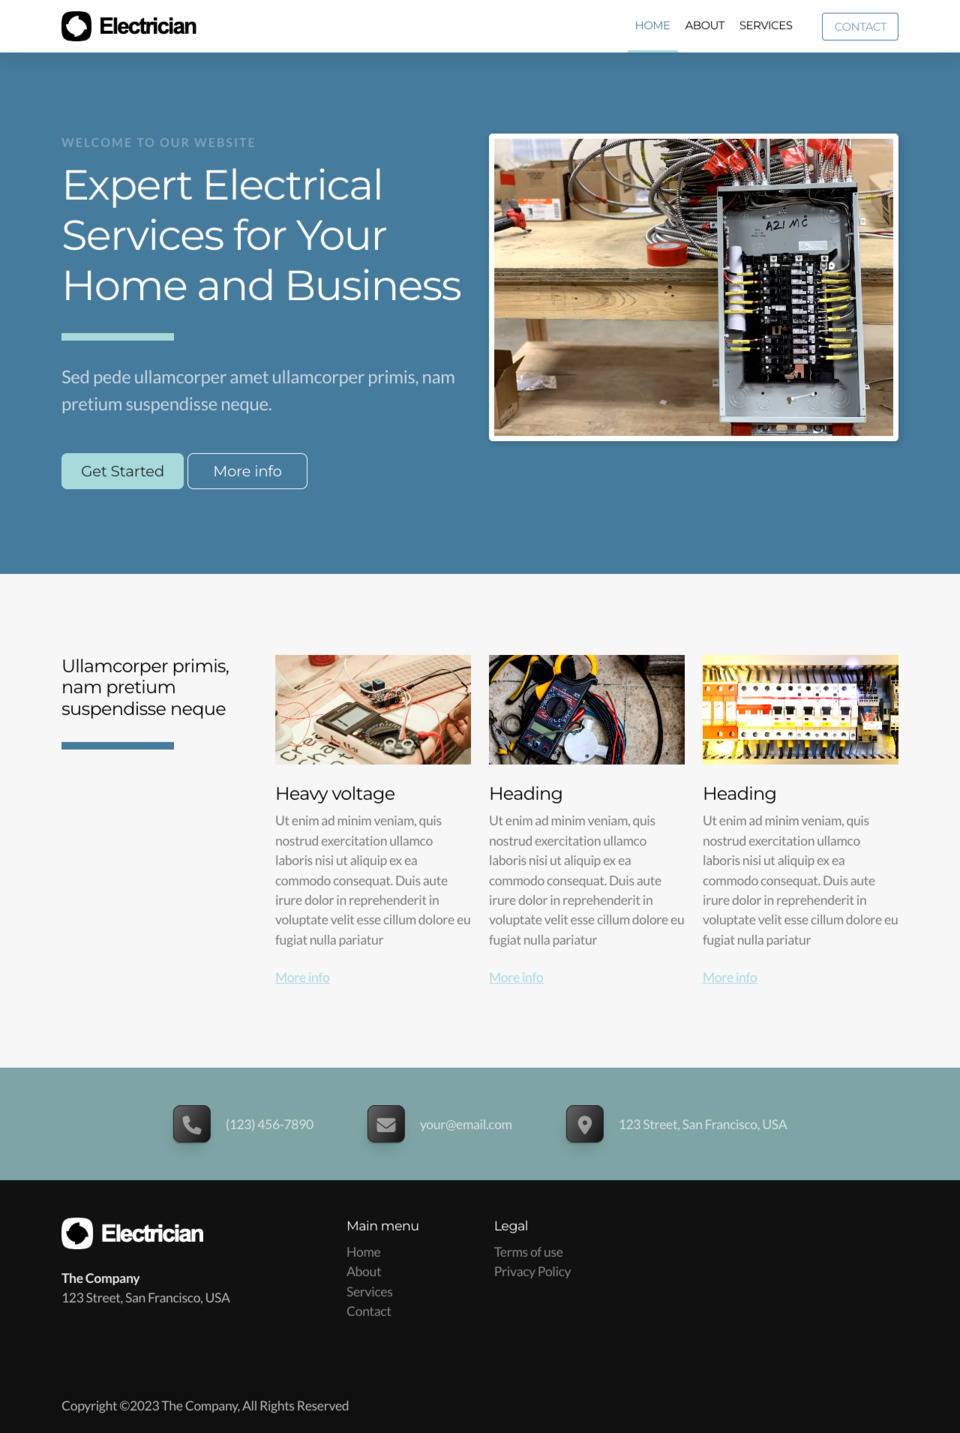 Electrician Website Template - Ideal for small businesses such as electricians, electrical services, technicians, handymen, and more